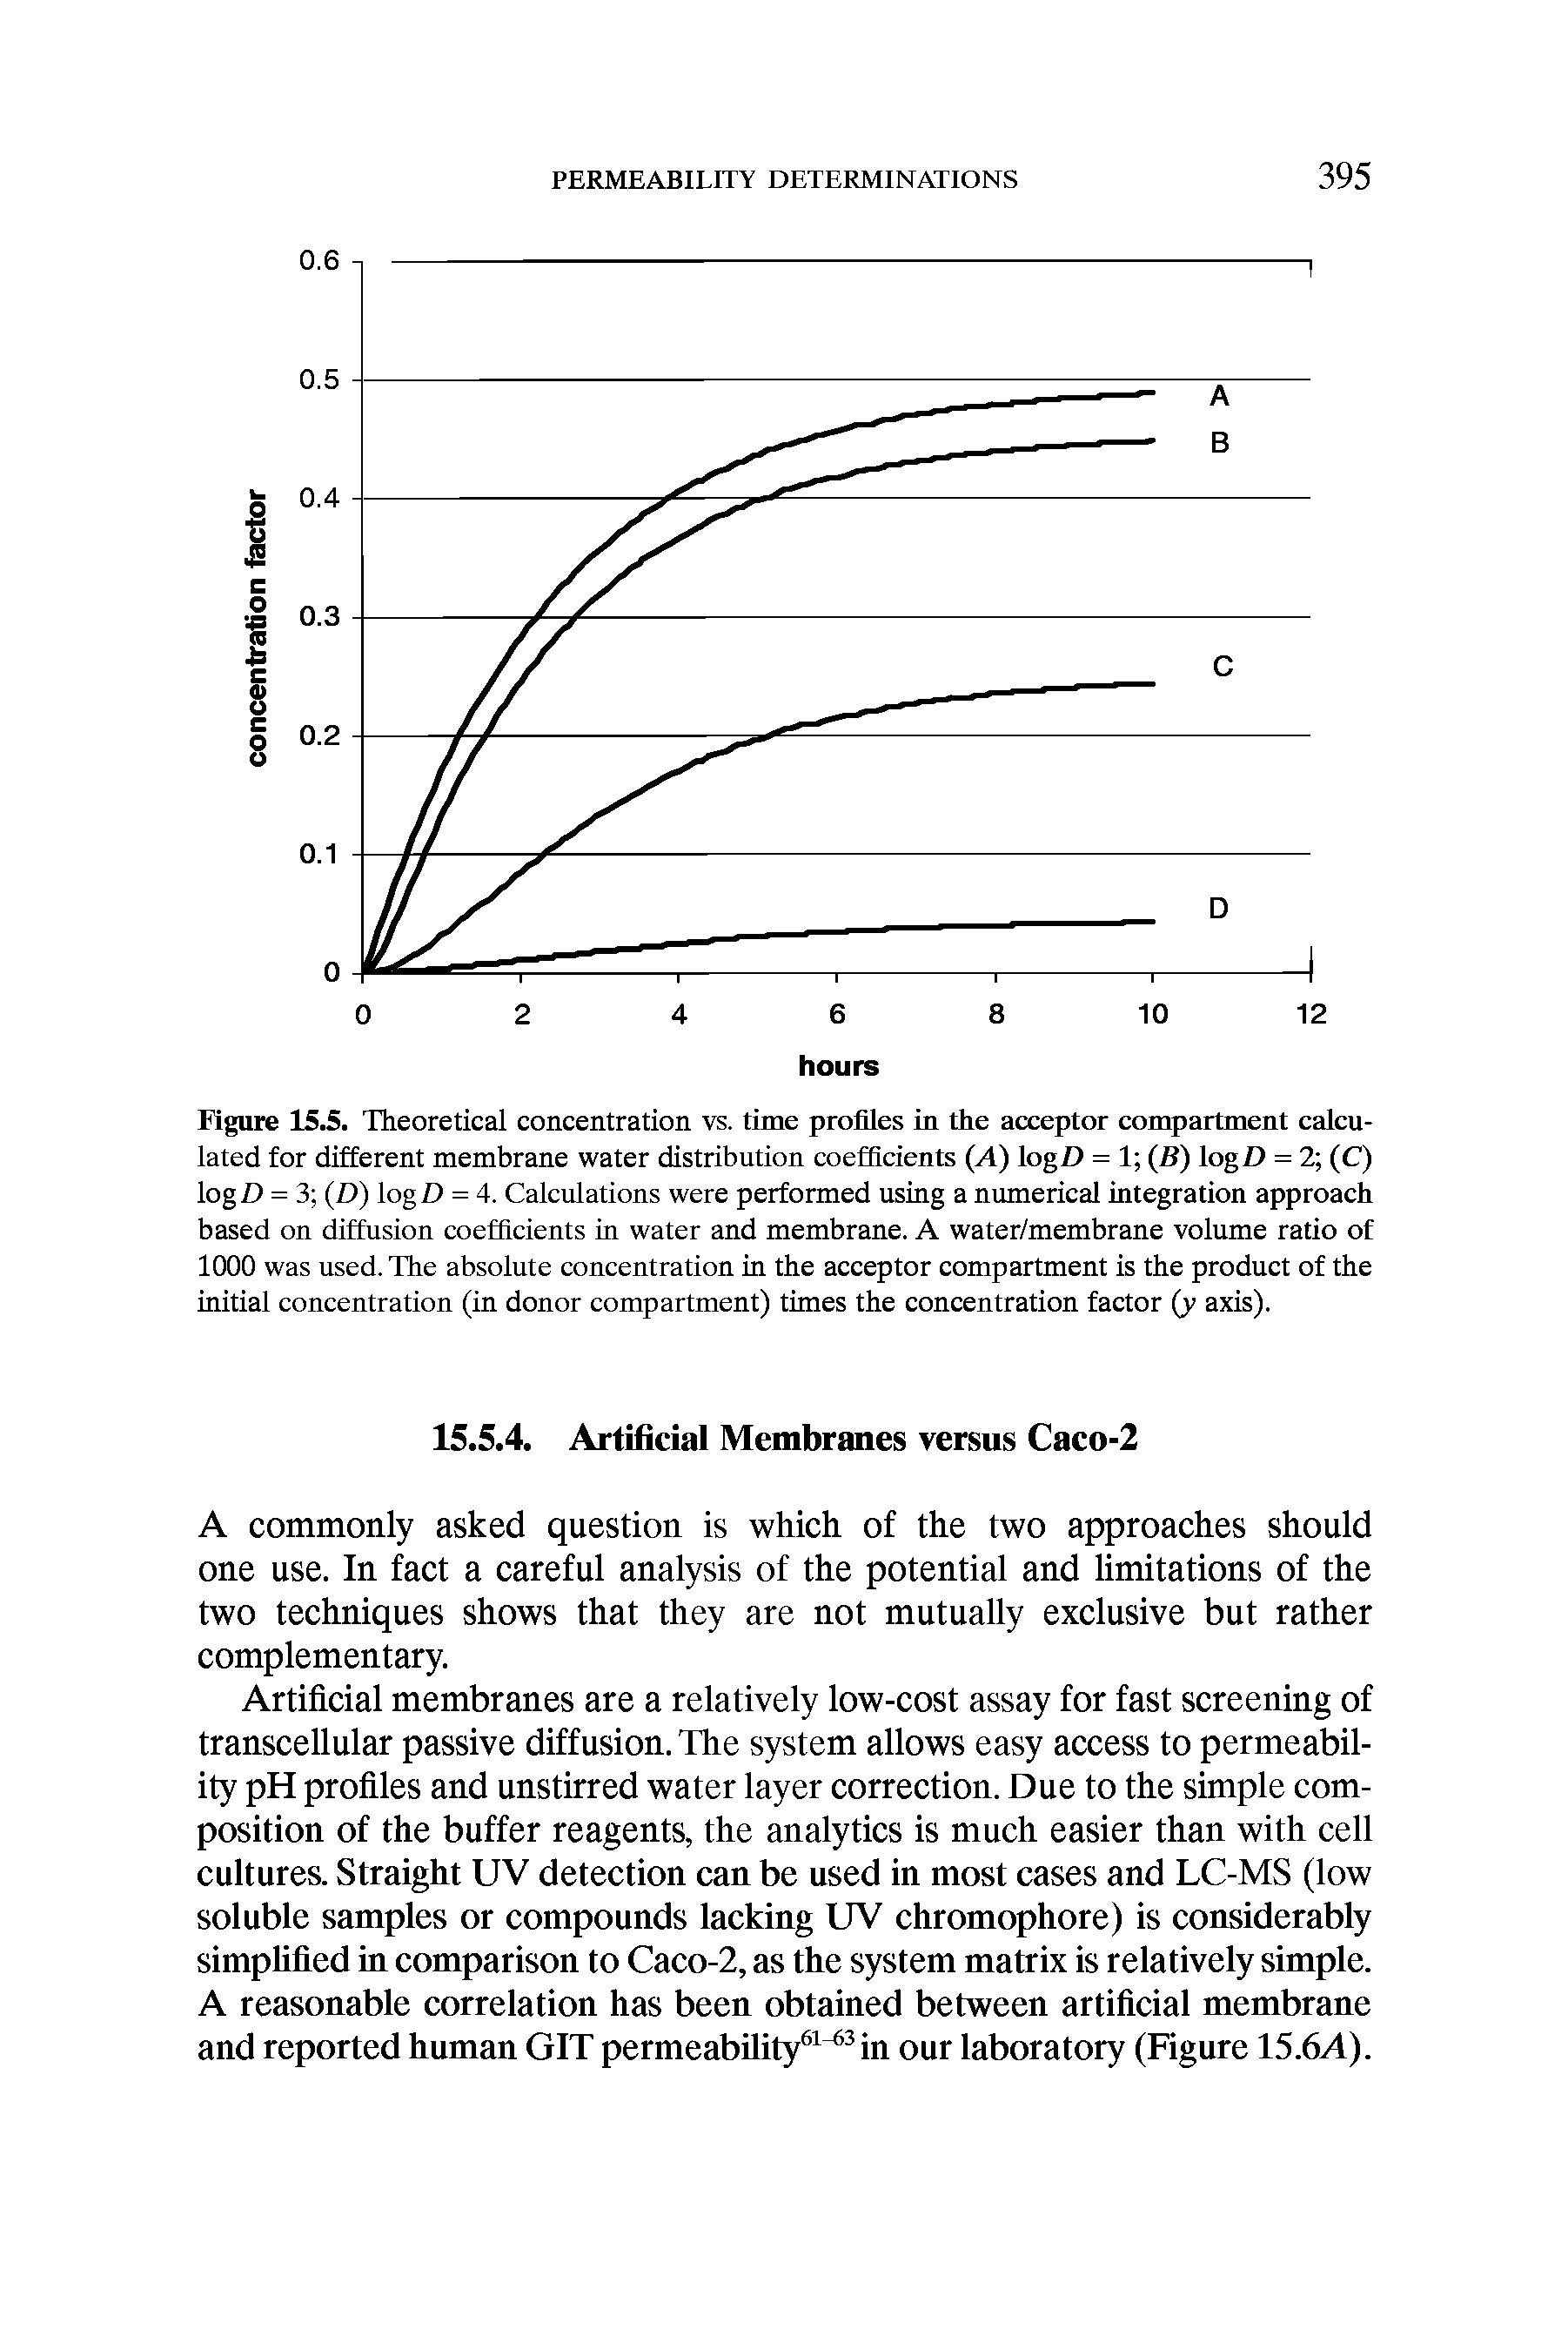 Figure 15.S. Theoretical concentration vs. time profiles in the acceptor eompaitment calculated for different membrane water distribution coefficients (A) logD = 1 (B) logD = 2 (C) logD = 3 (D) logD = 4. Calculations were performed using a numerical integration approach based on diffusion coefficients in water and membrane. A water/membrane volume ratio of 1000 was used. The absolute concentration in the acceptor compartment is the product of the initial concentration (in donor compartment) times the concentration factor (y axis).